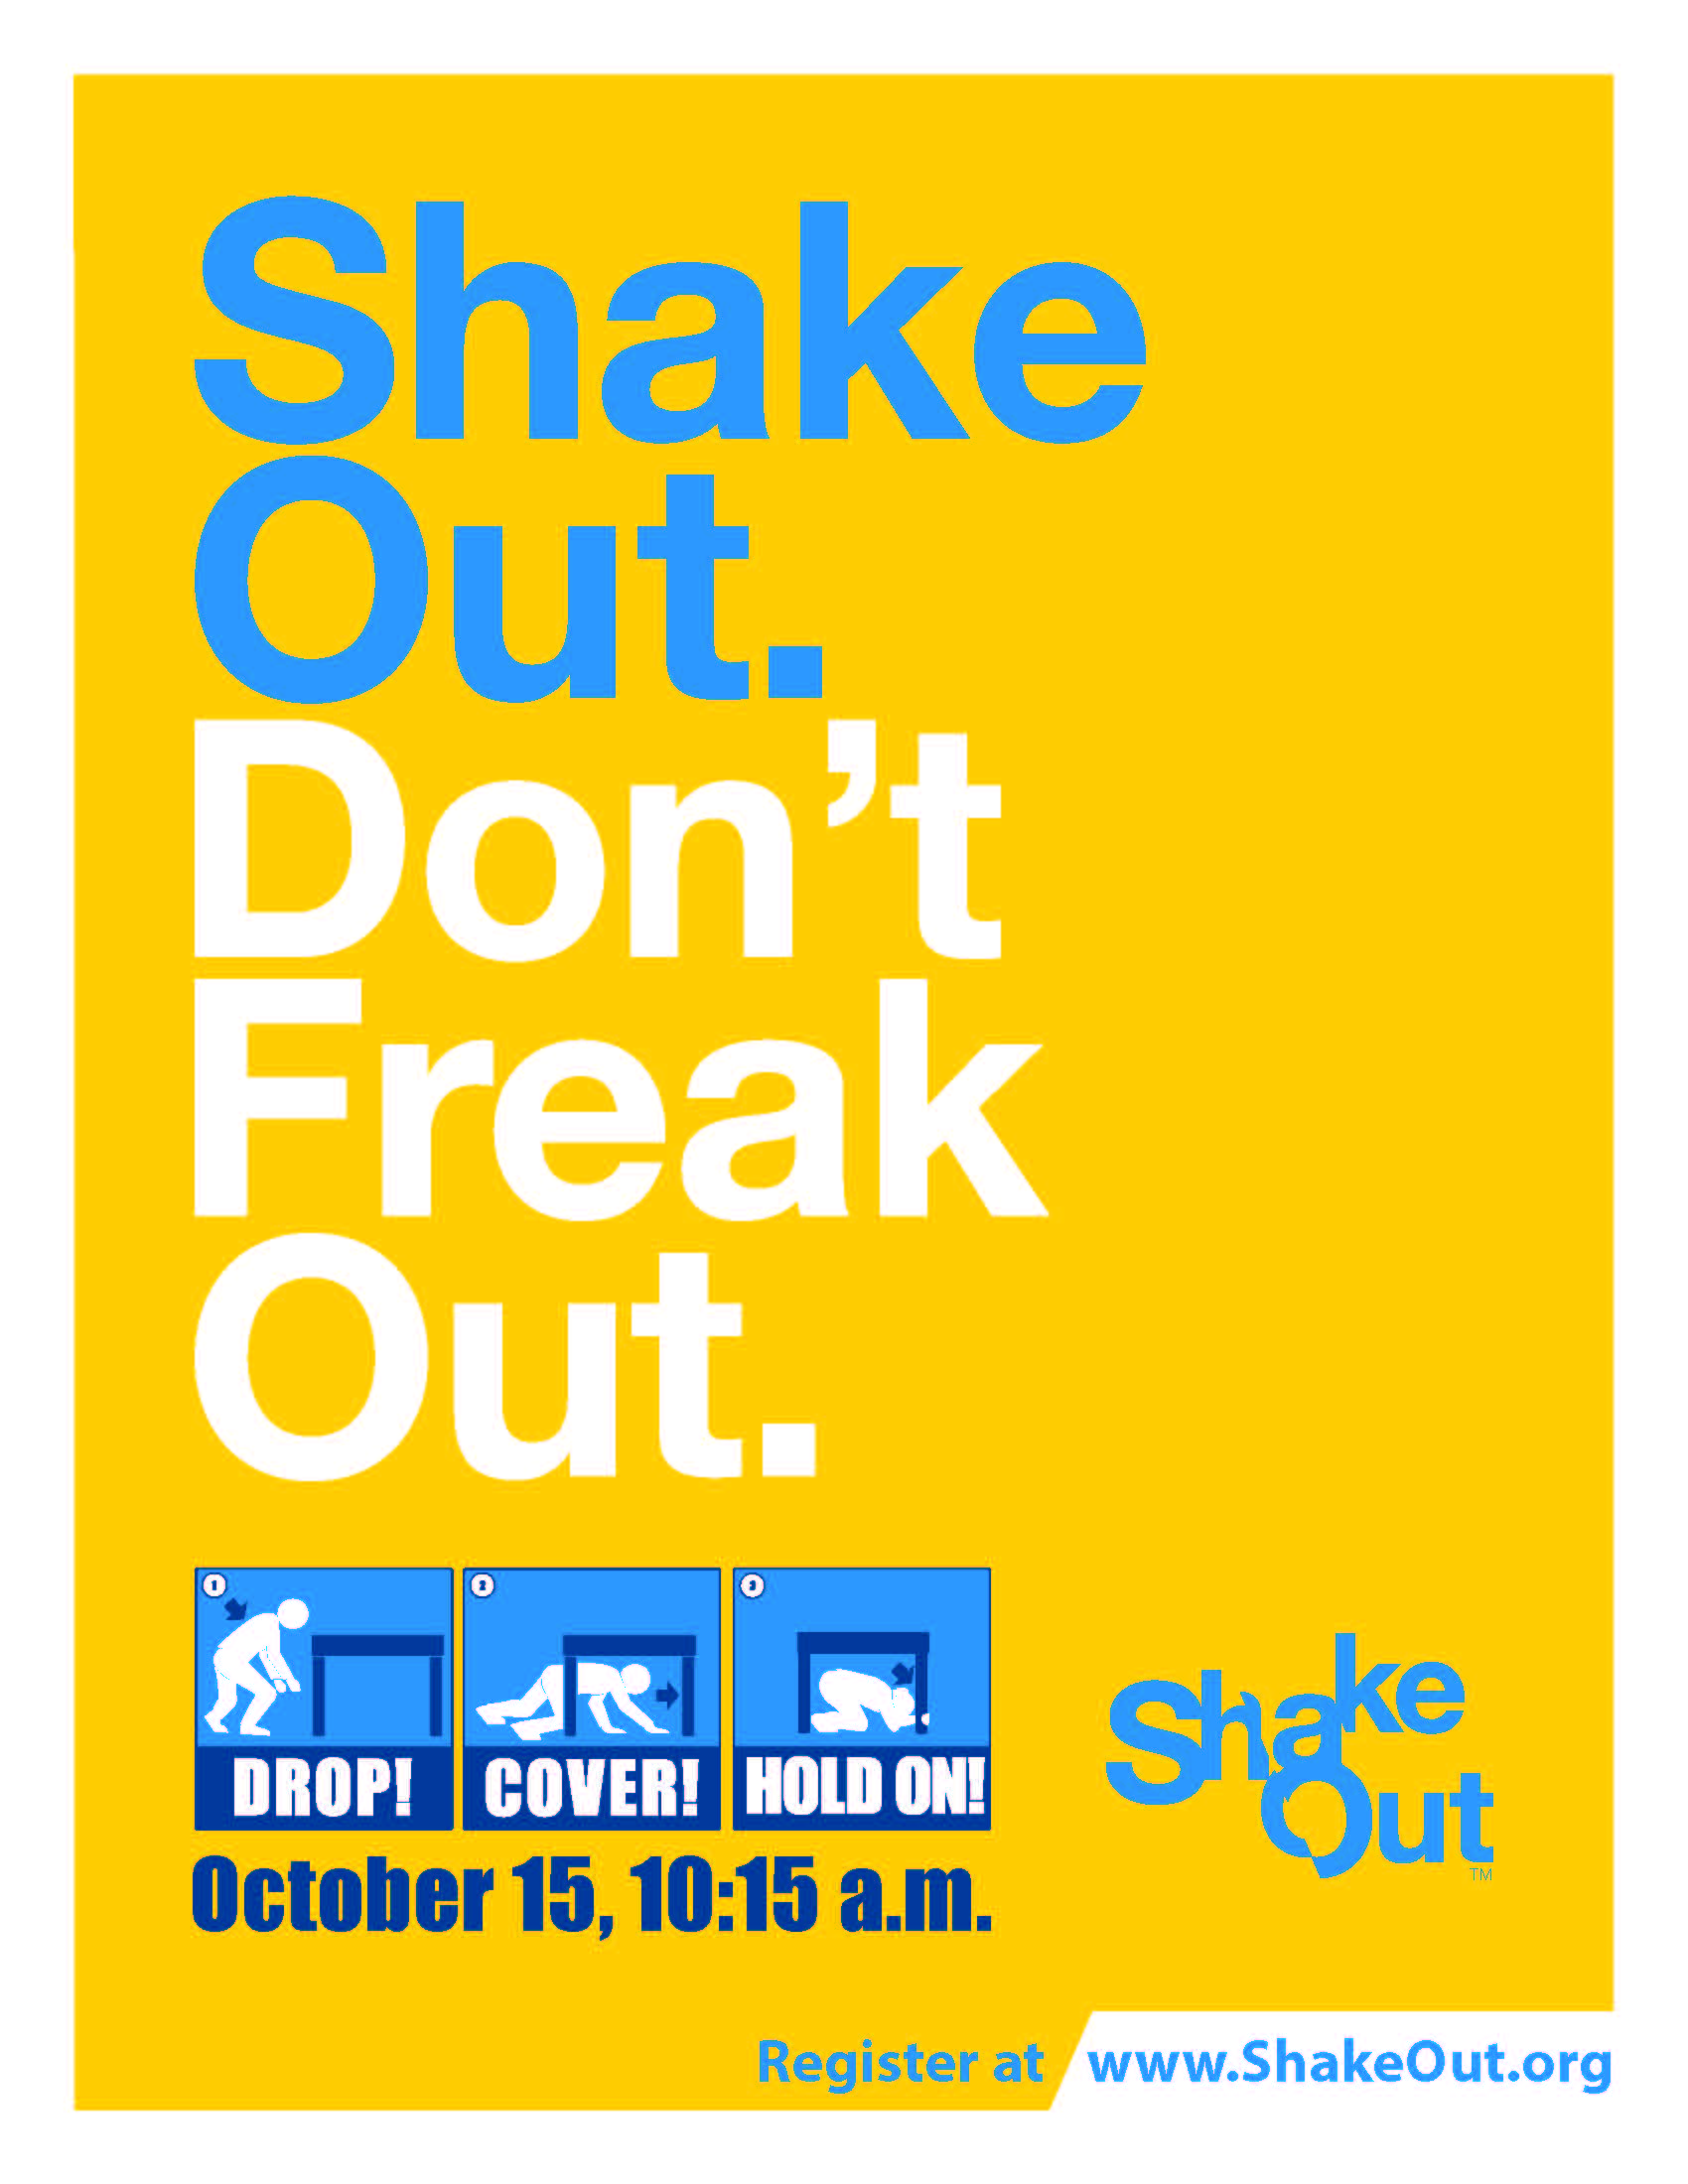 Shake out. Don't freak out. Drop, cover, and hold on!